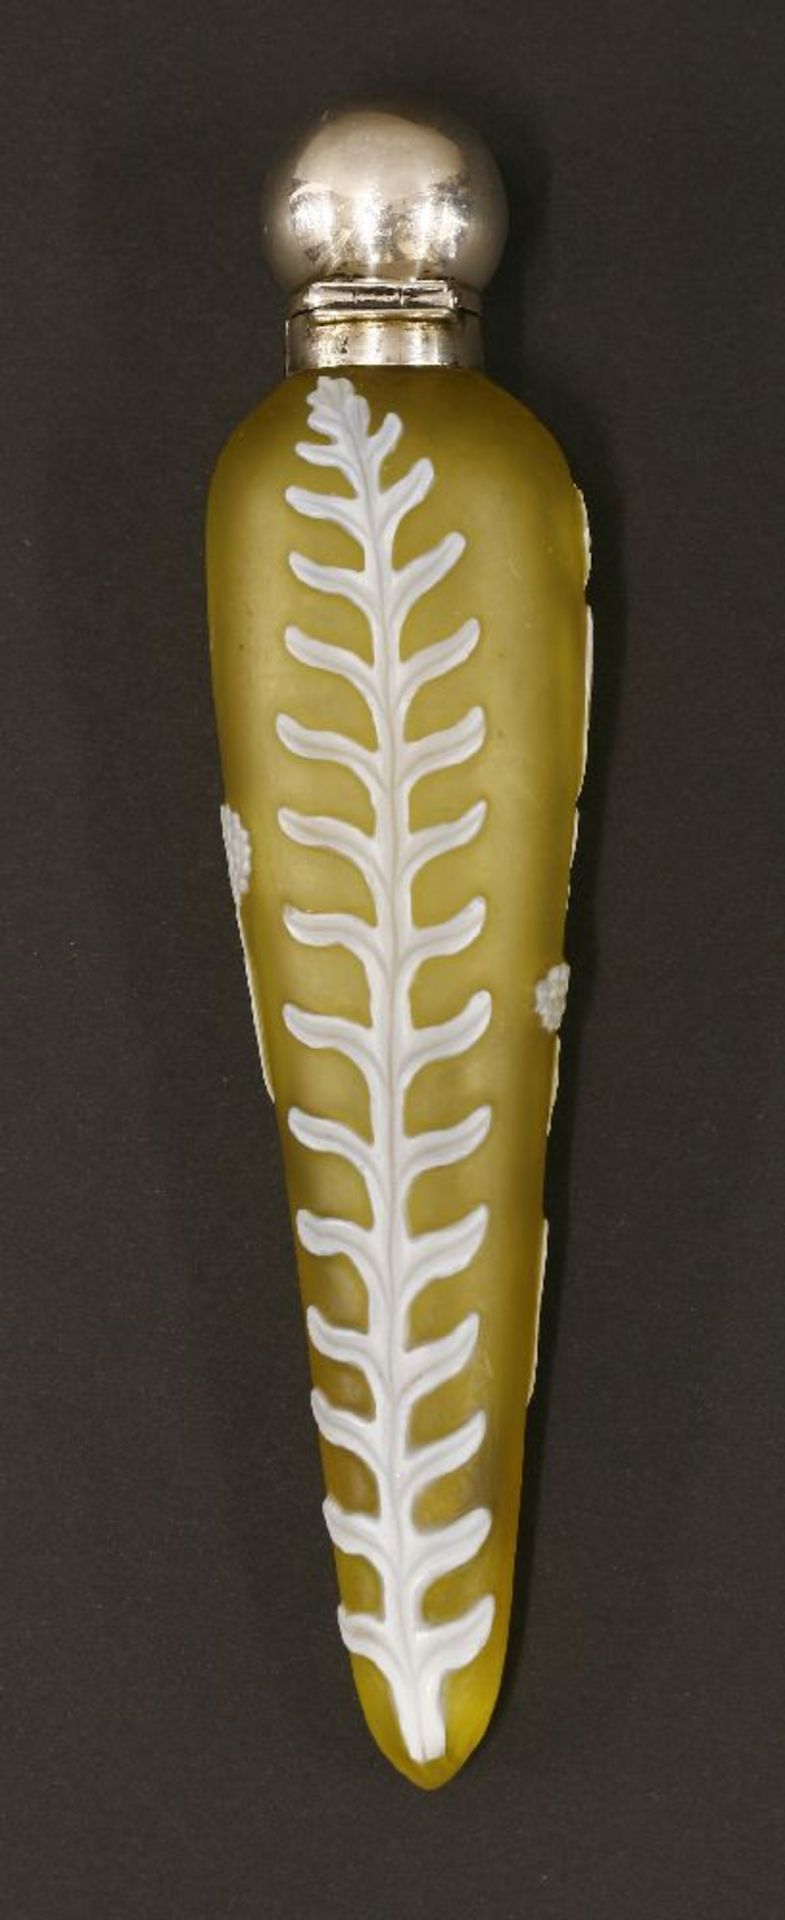 A cameo glass scent bottle,by Thomas Webb & Co, Stourbridge, the yellow glass body of elongated - Image 2 of 2